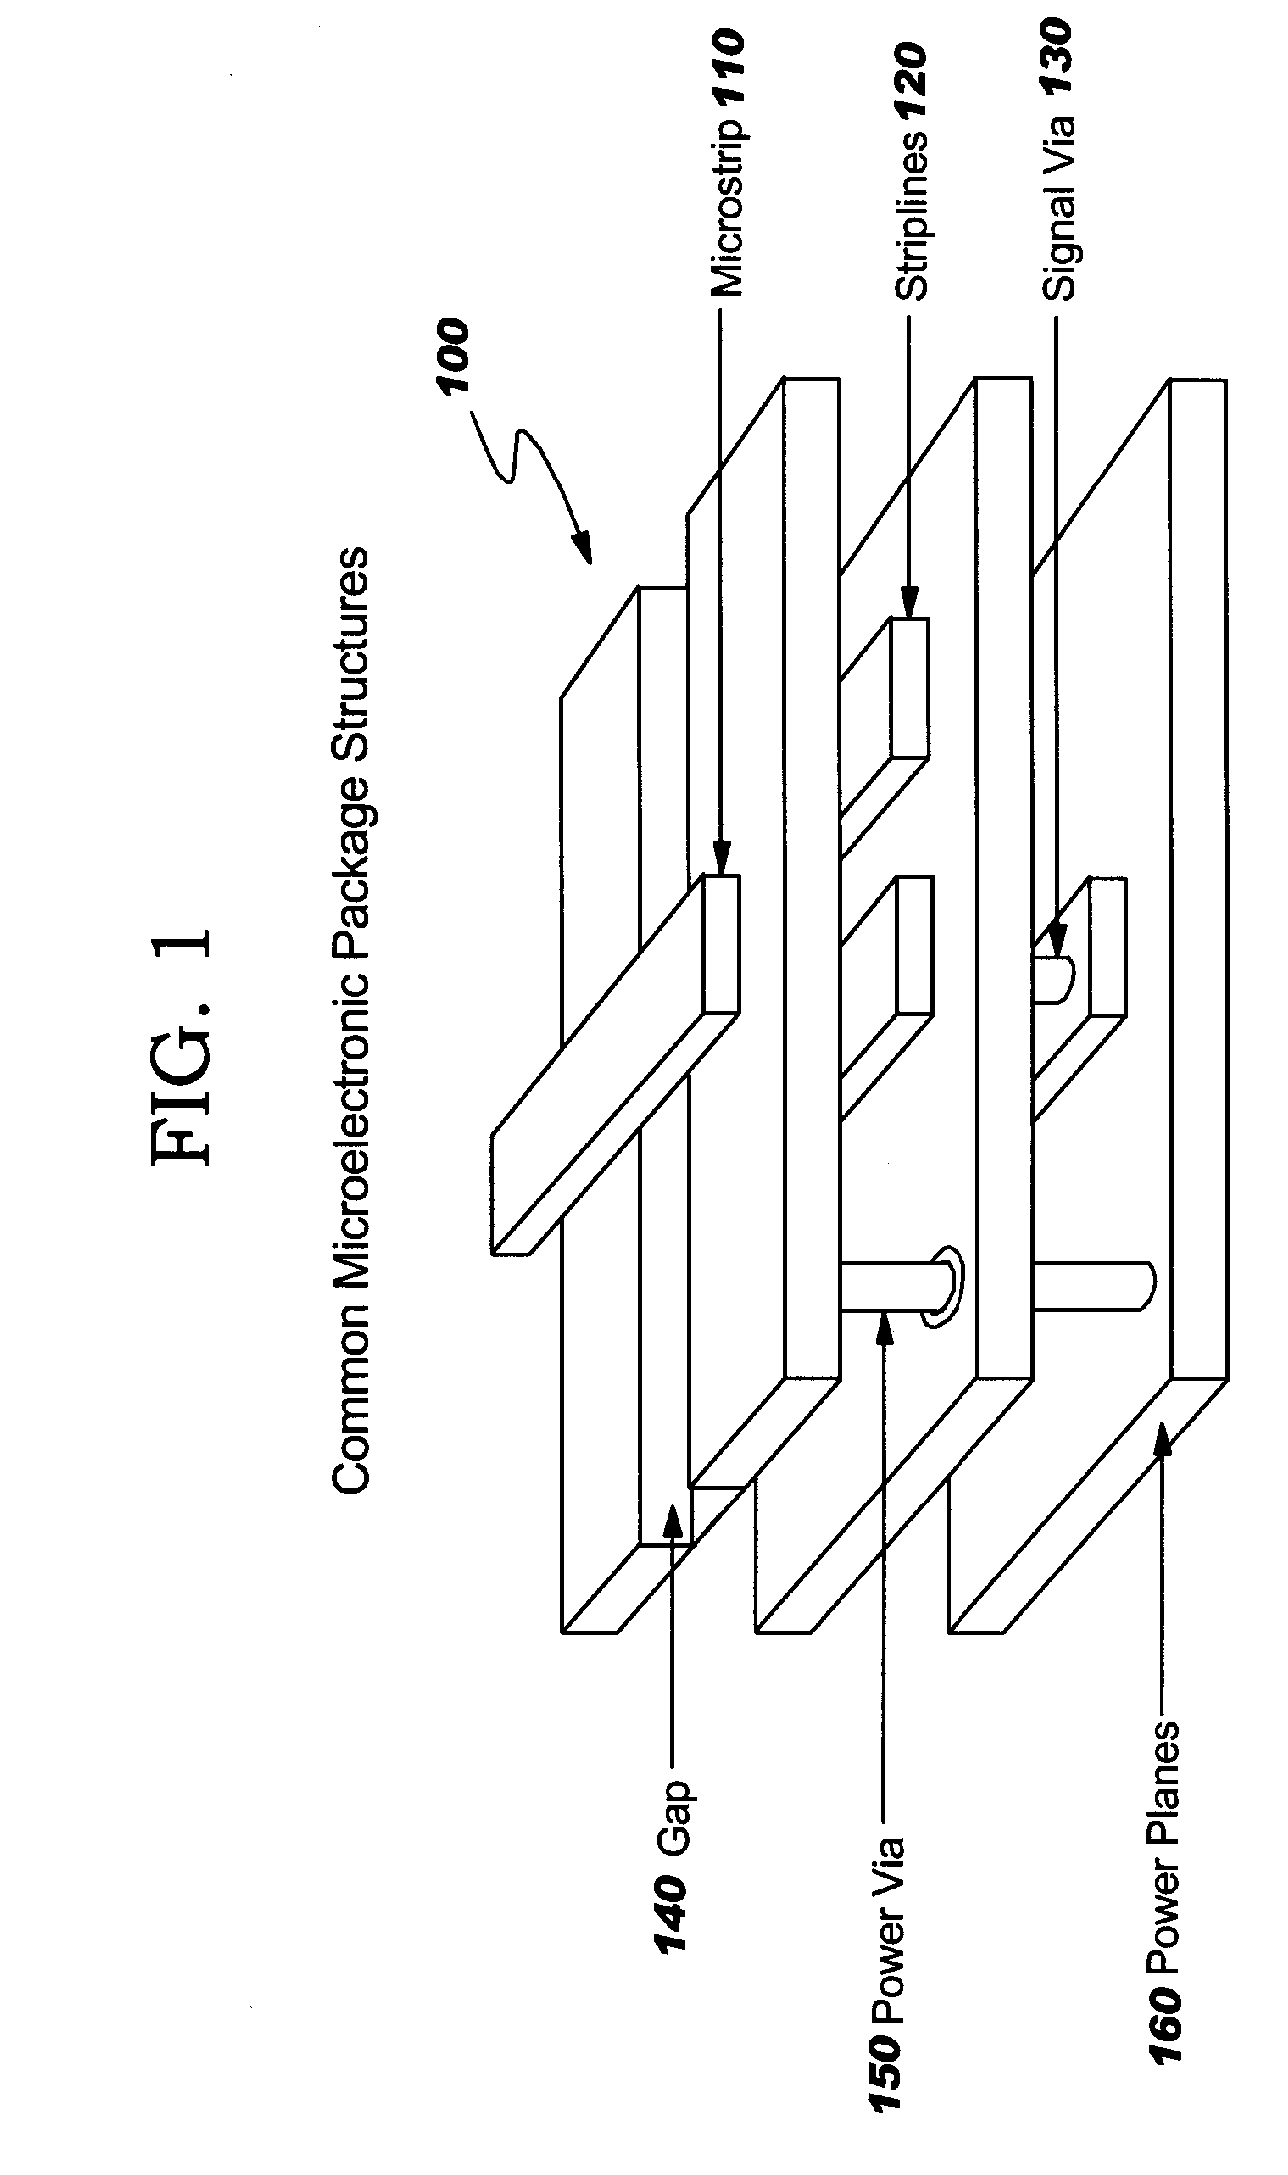 Hierarchical method of power supply noise and signal integrity analysis